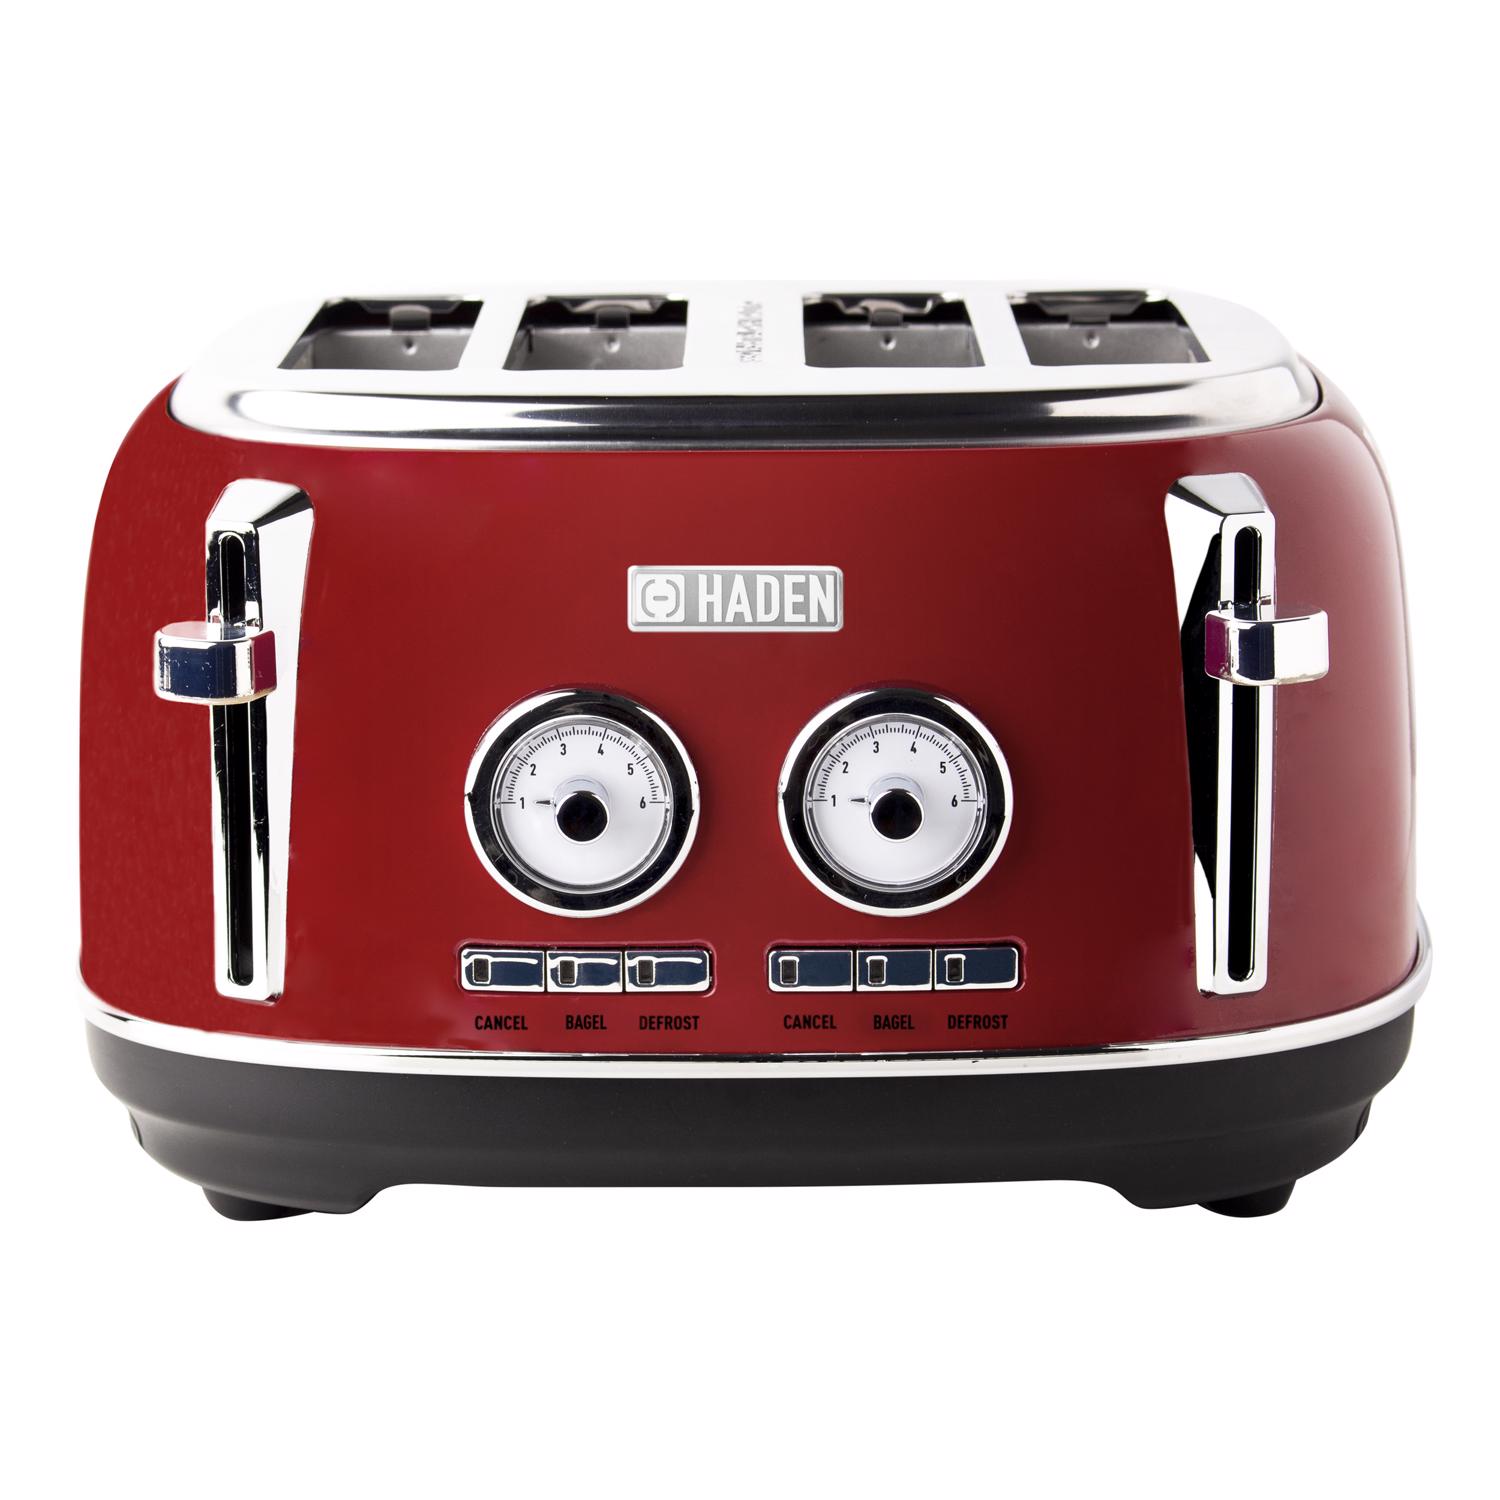 Photos - Toaster Haden Dorset Stainless Steel Red 4 slot  7.5 in. H X 12.5 in. W X 1 